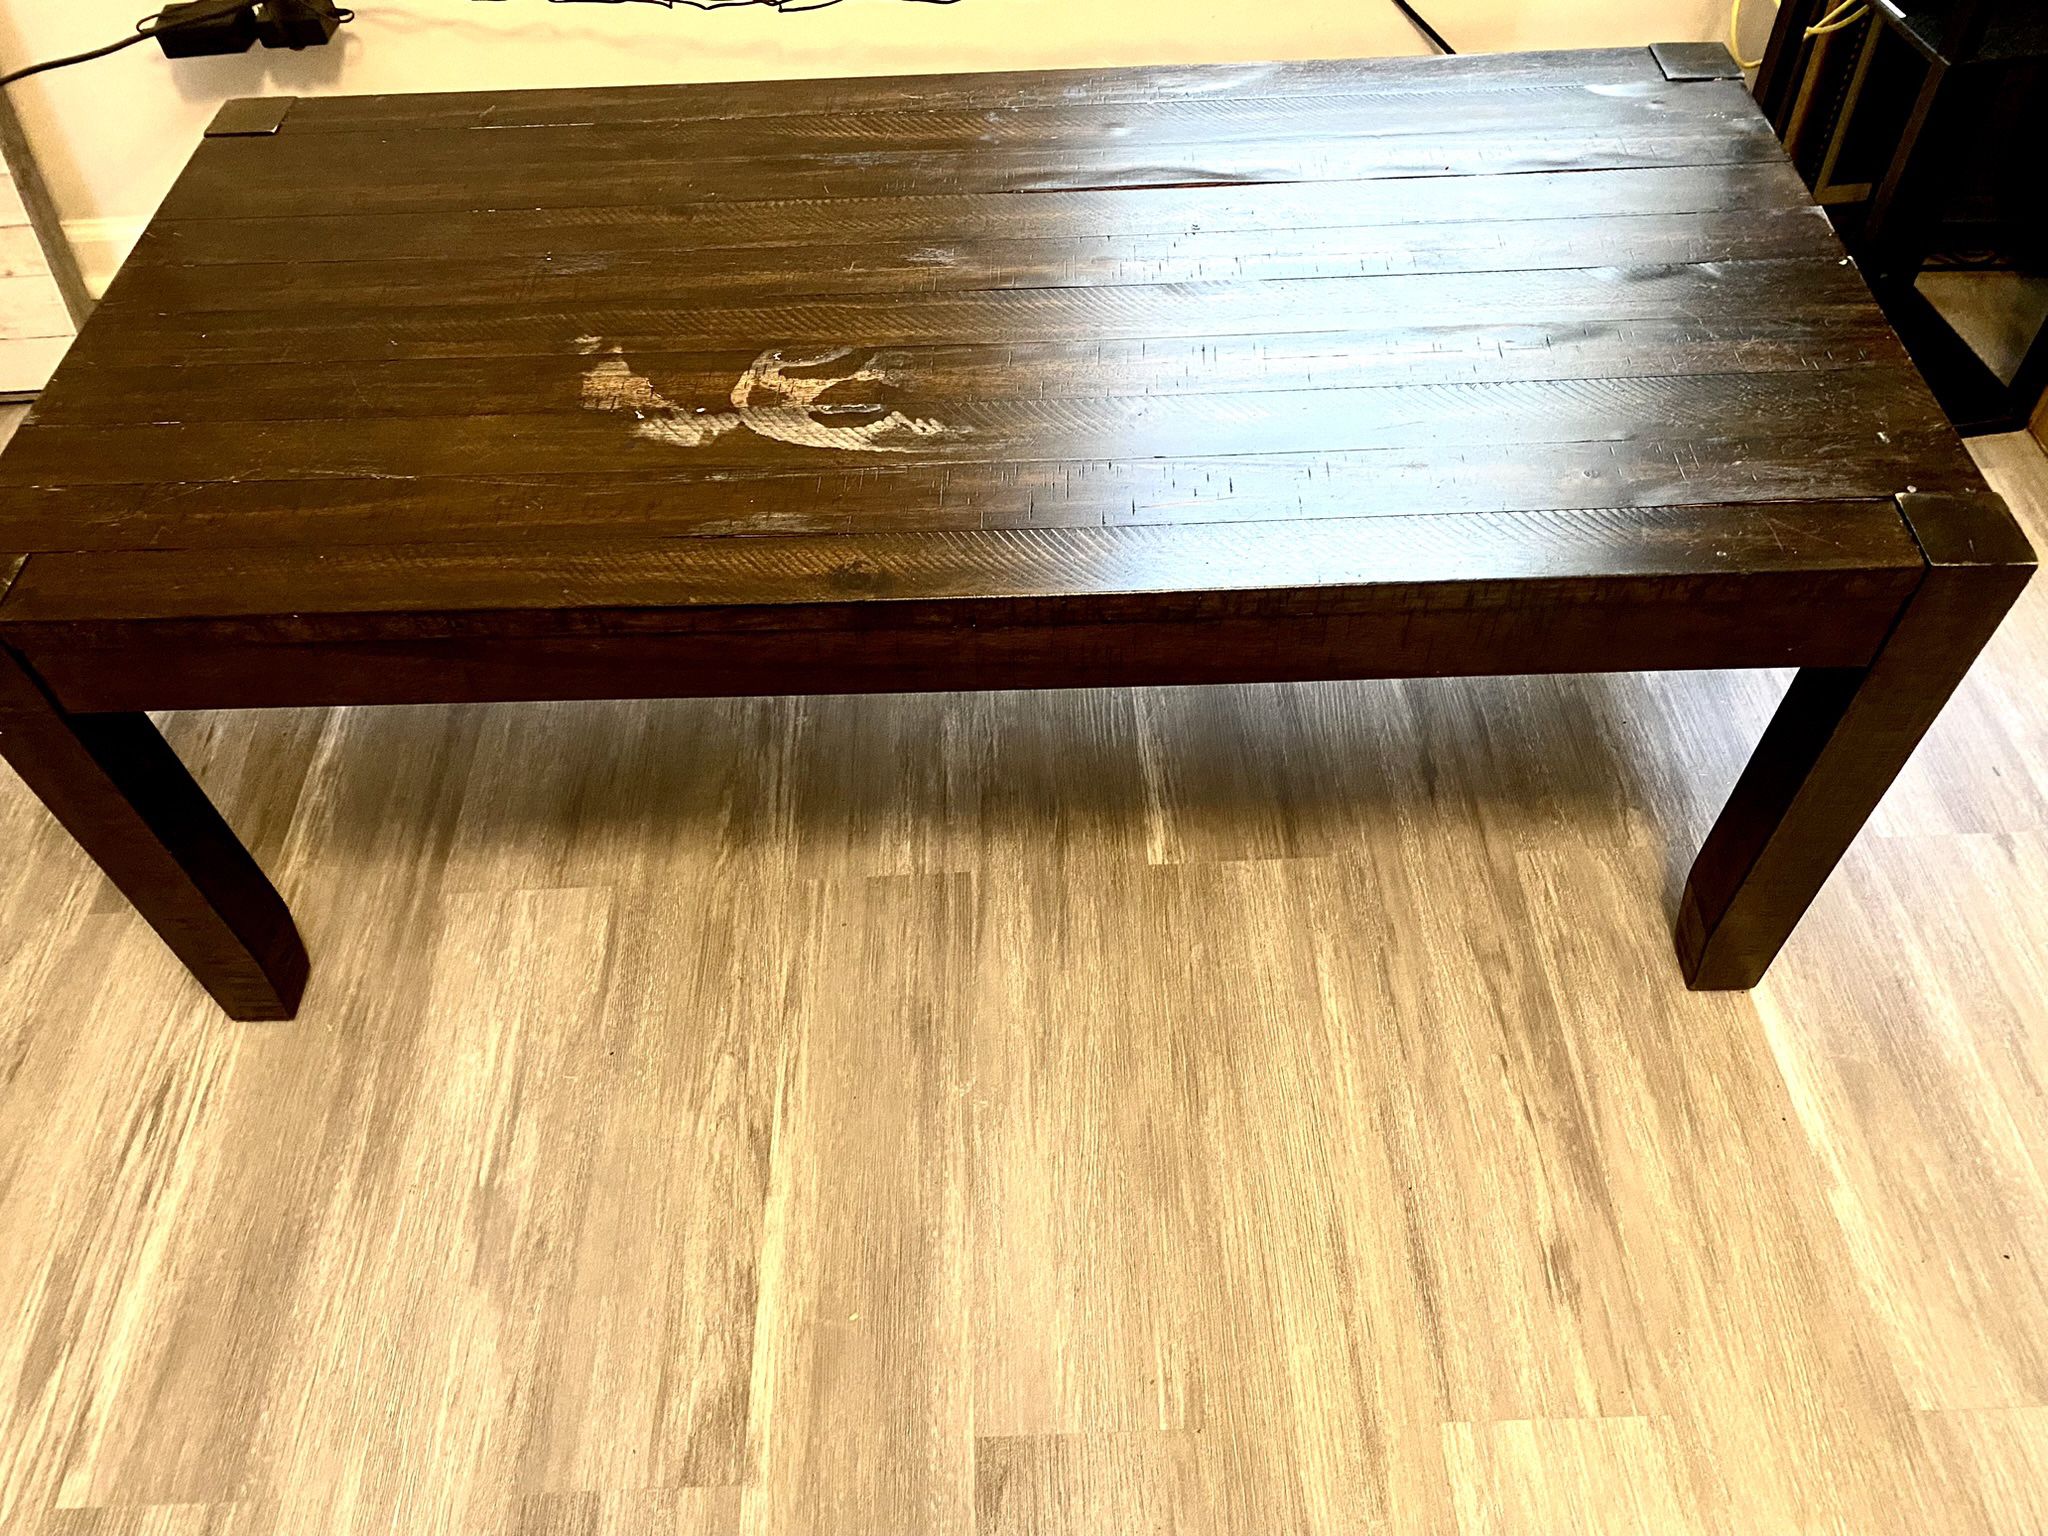 Two End Tables With Coffee Table 